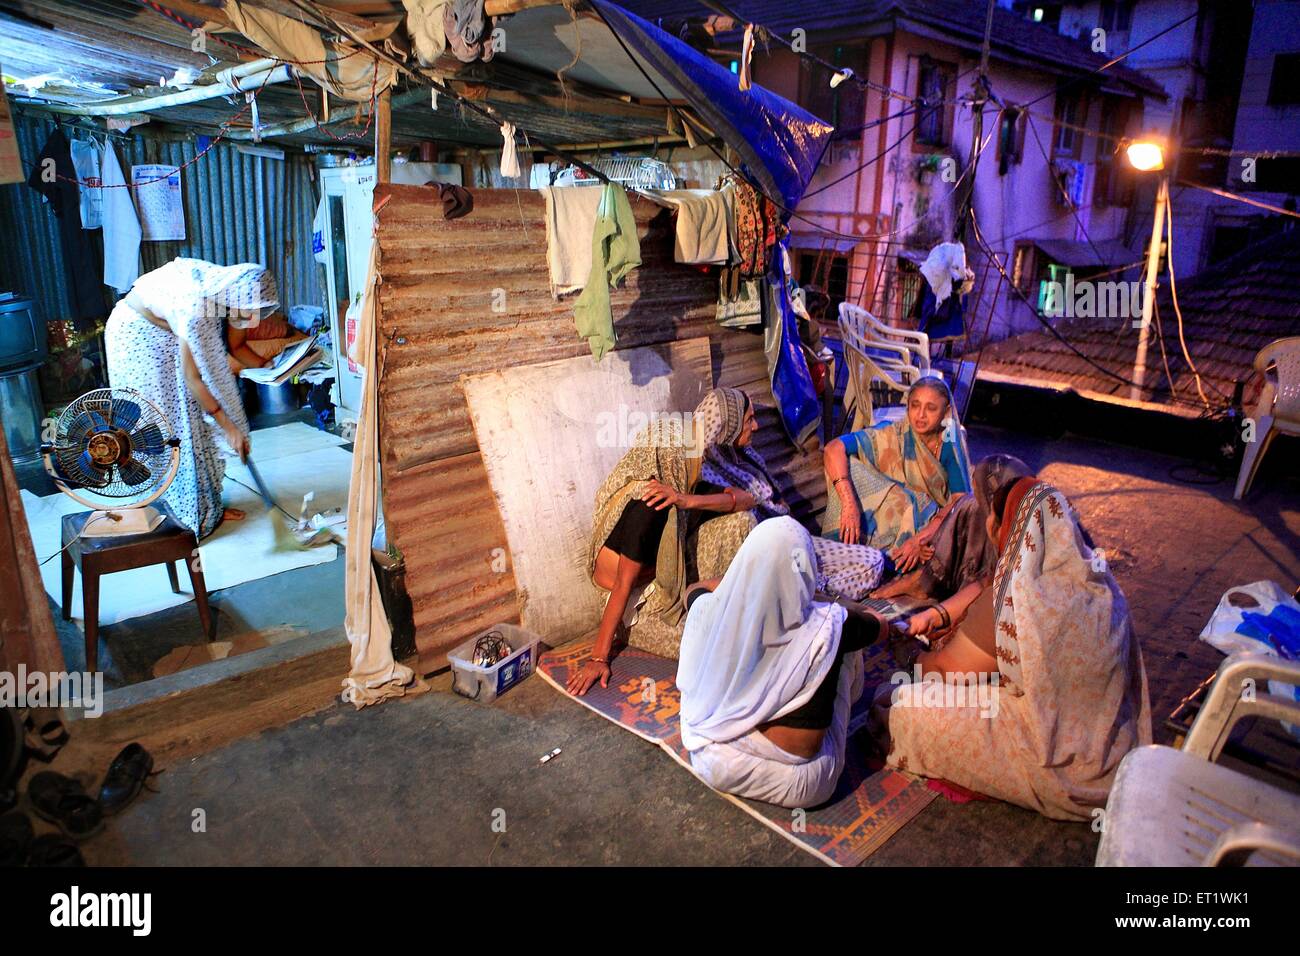 Mourners and relatives gather house of Harish Gohil killed in attack Nariman House bomb blasts on 26th November 2008 Mumbai Stock Photo